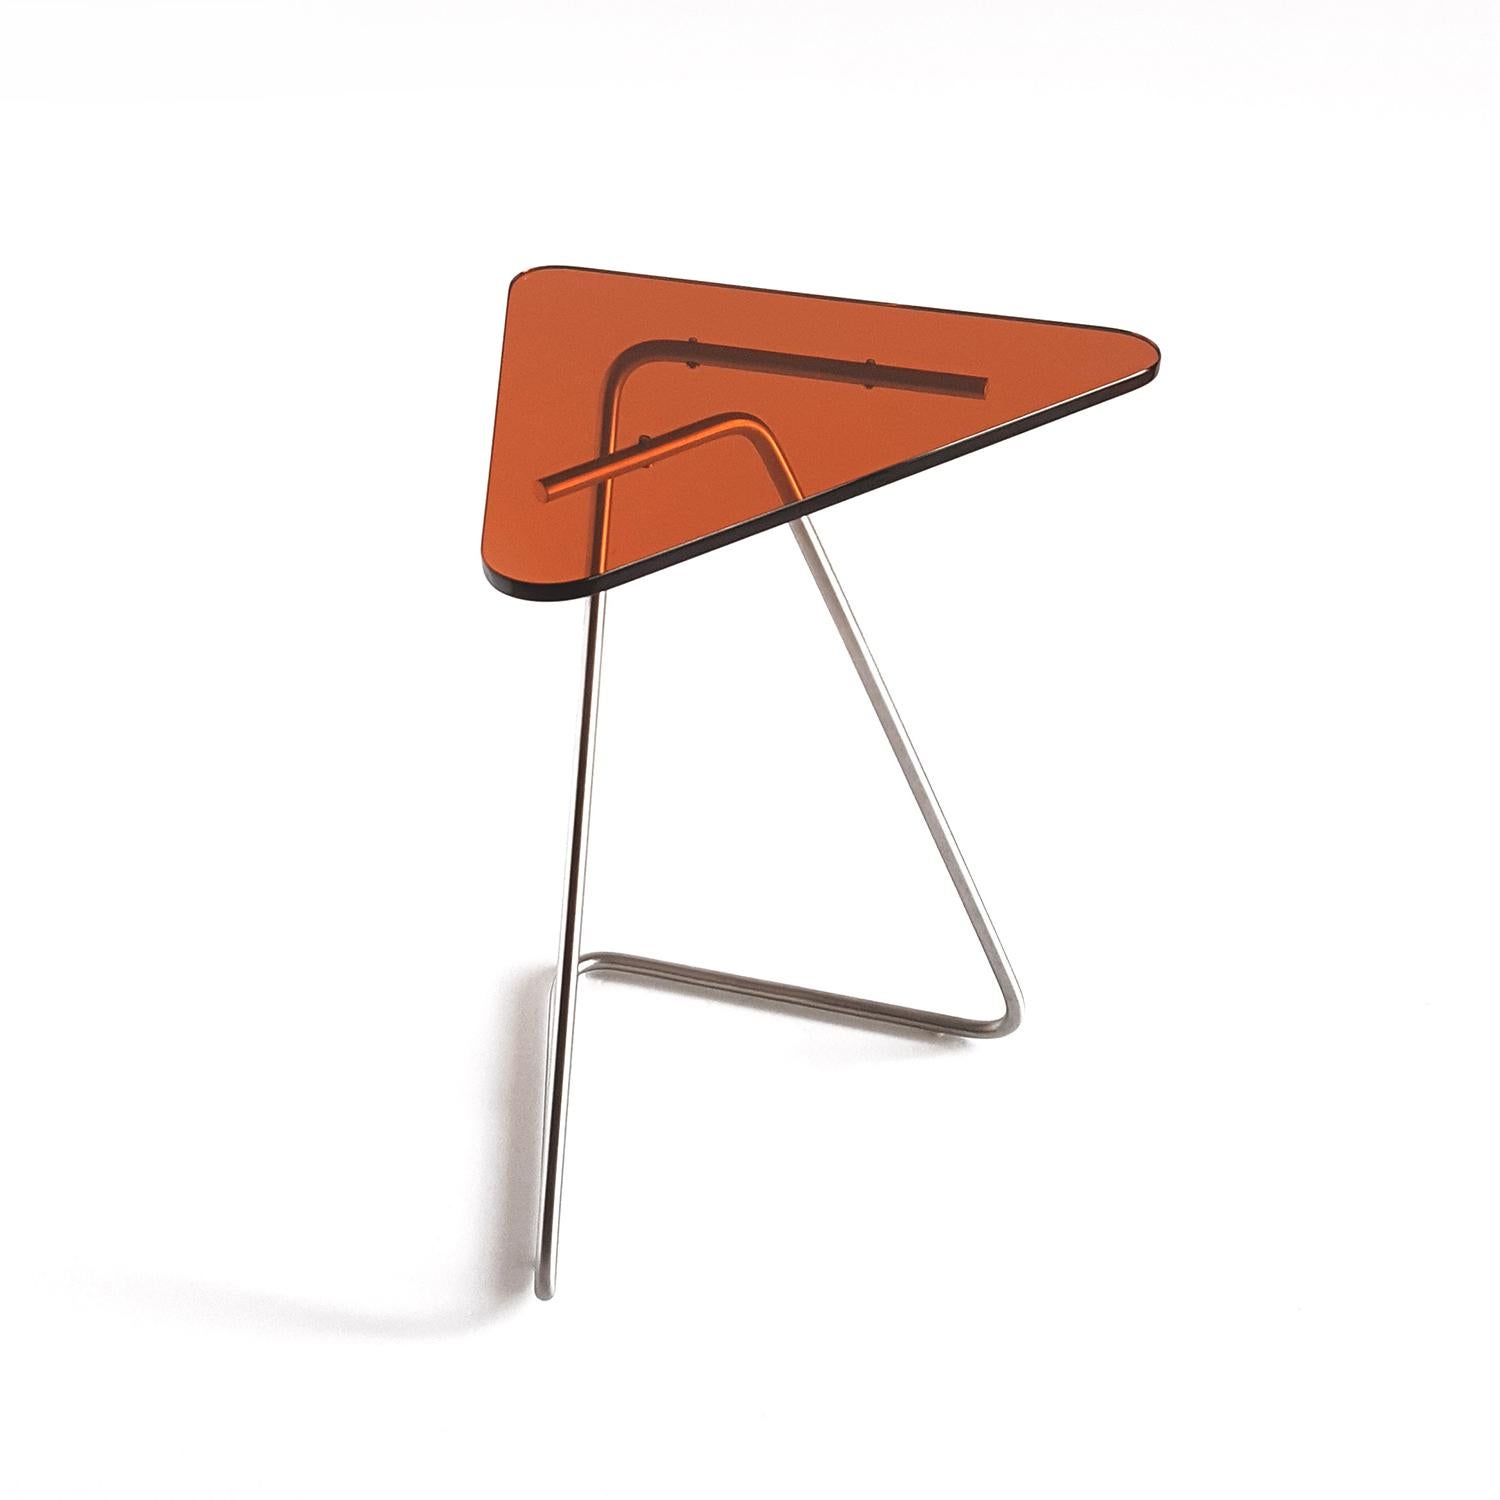 The triangle side table by Rita Kettaneh 
Dimensions: The base: brushed stainless steel 
 optionally plated with copper or brass
 The top: acrylic
Materials: H 49.5 x W 41 x D 9.5 cm
Weight: 2.6 Kg

Colors and finishes: 
Stainless finish: